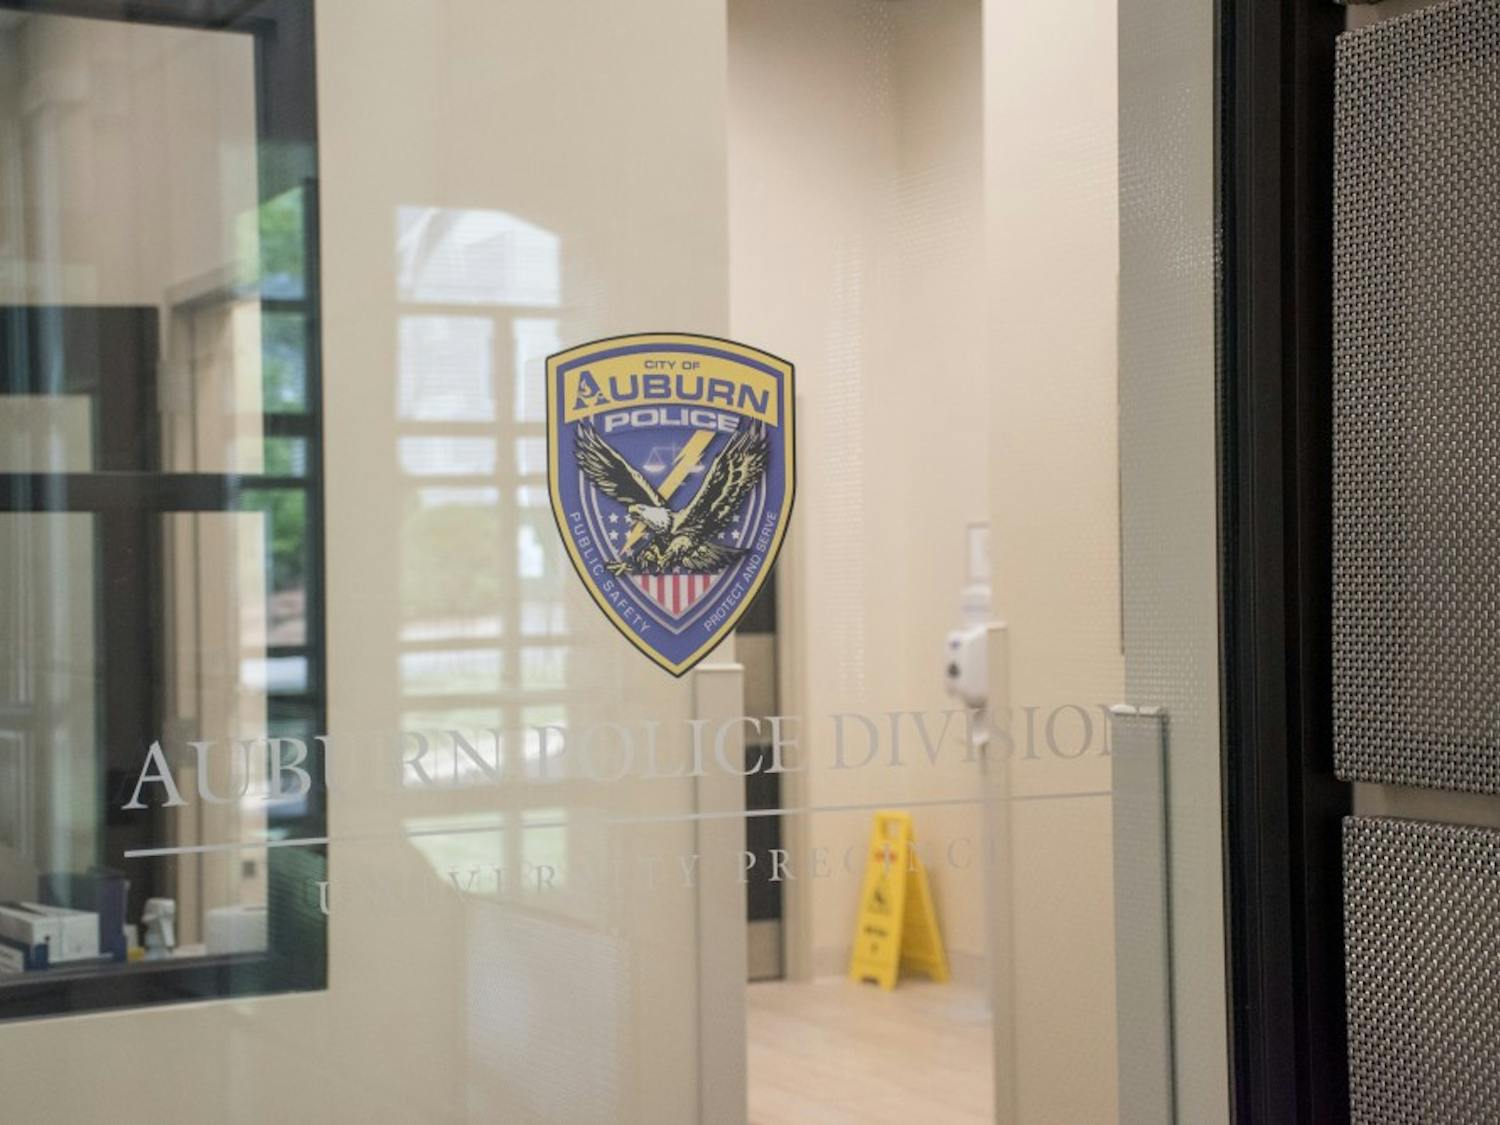 The door to the Auburn Police Division on Friday, April 6, 2018, in Auburn, Ala.